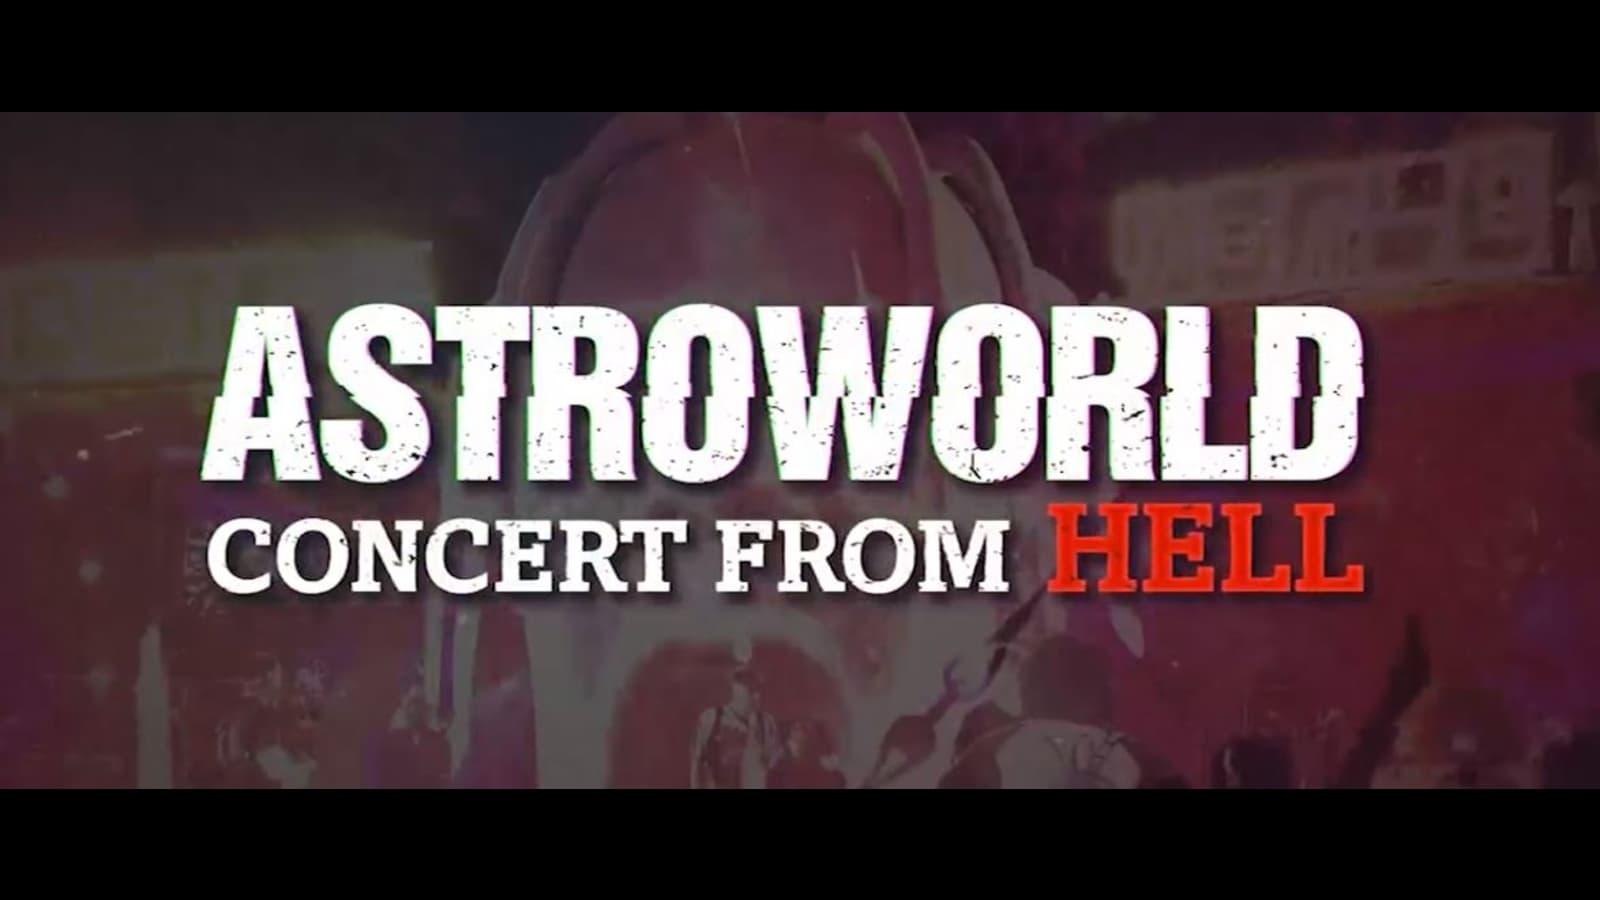 Astroworld: Concert from Hell backdrop